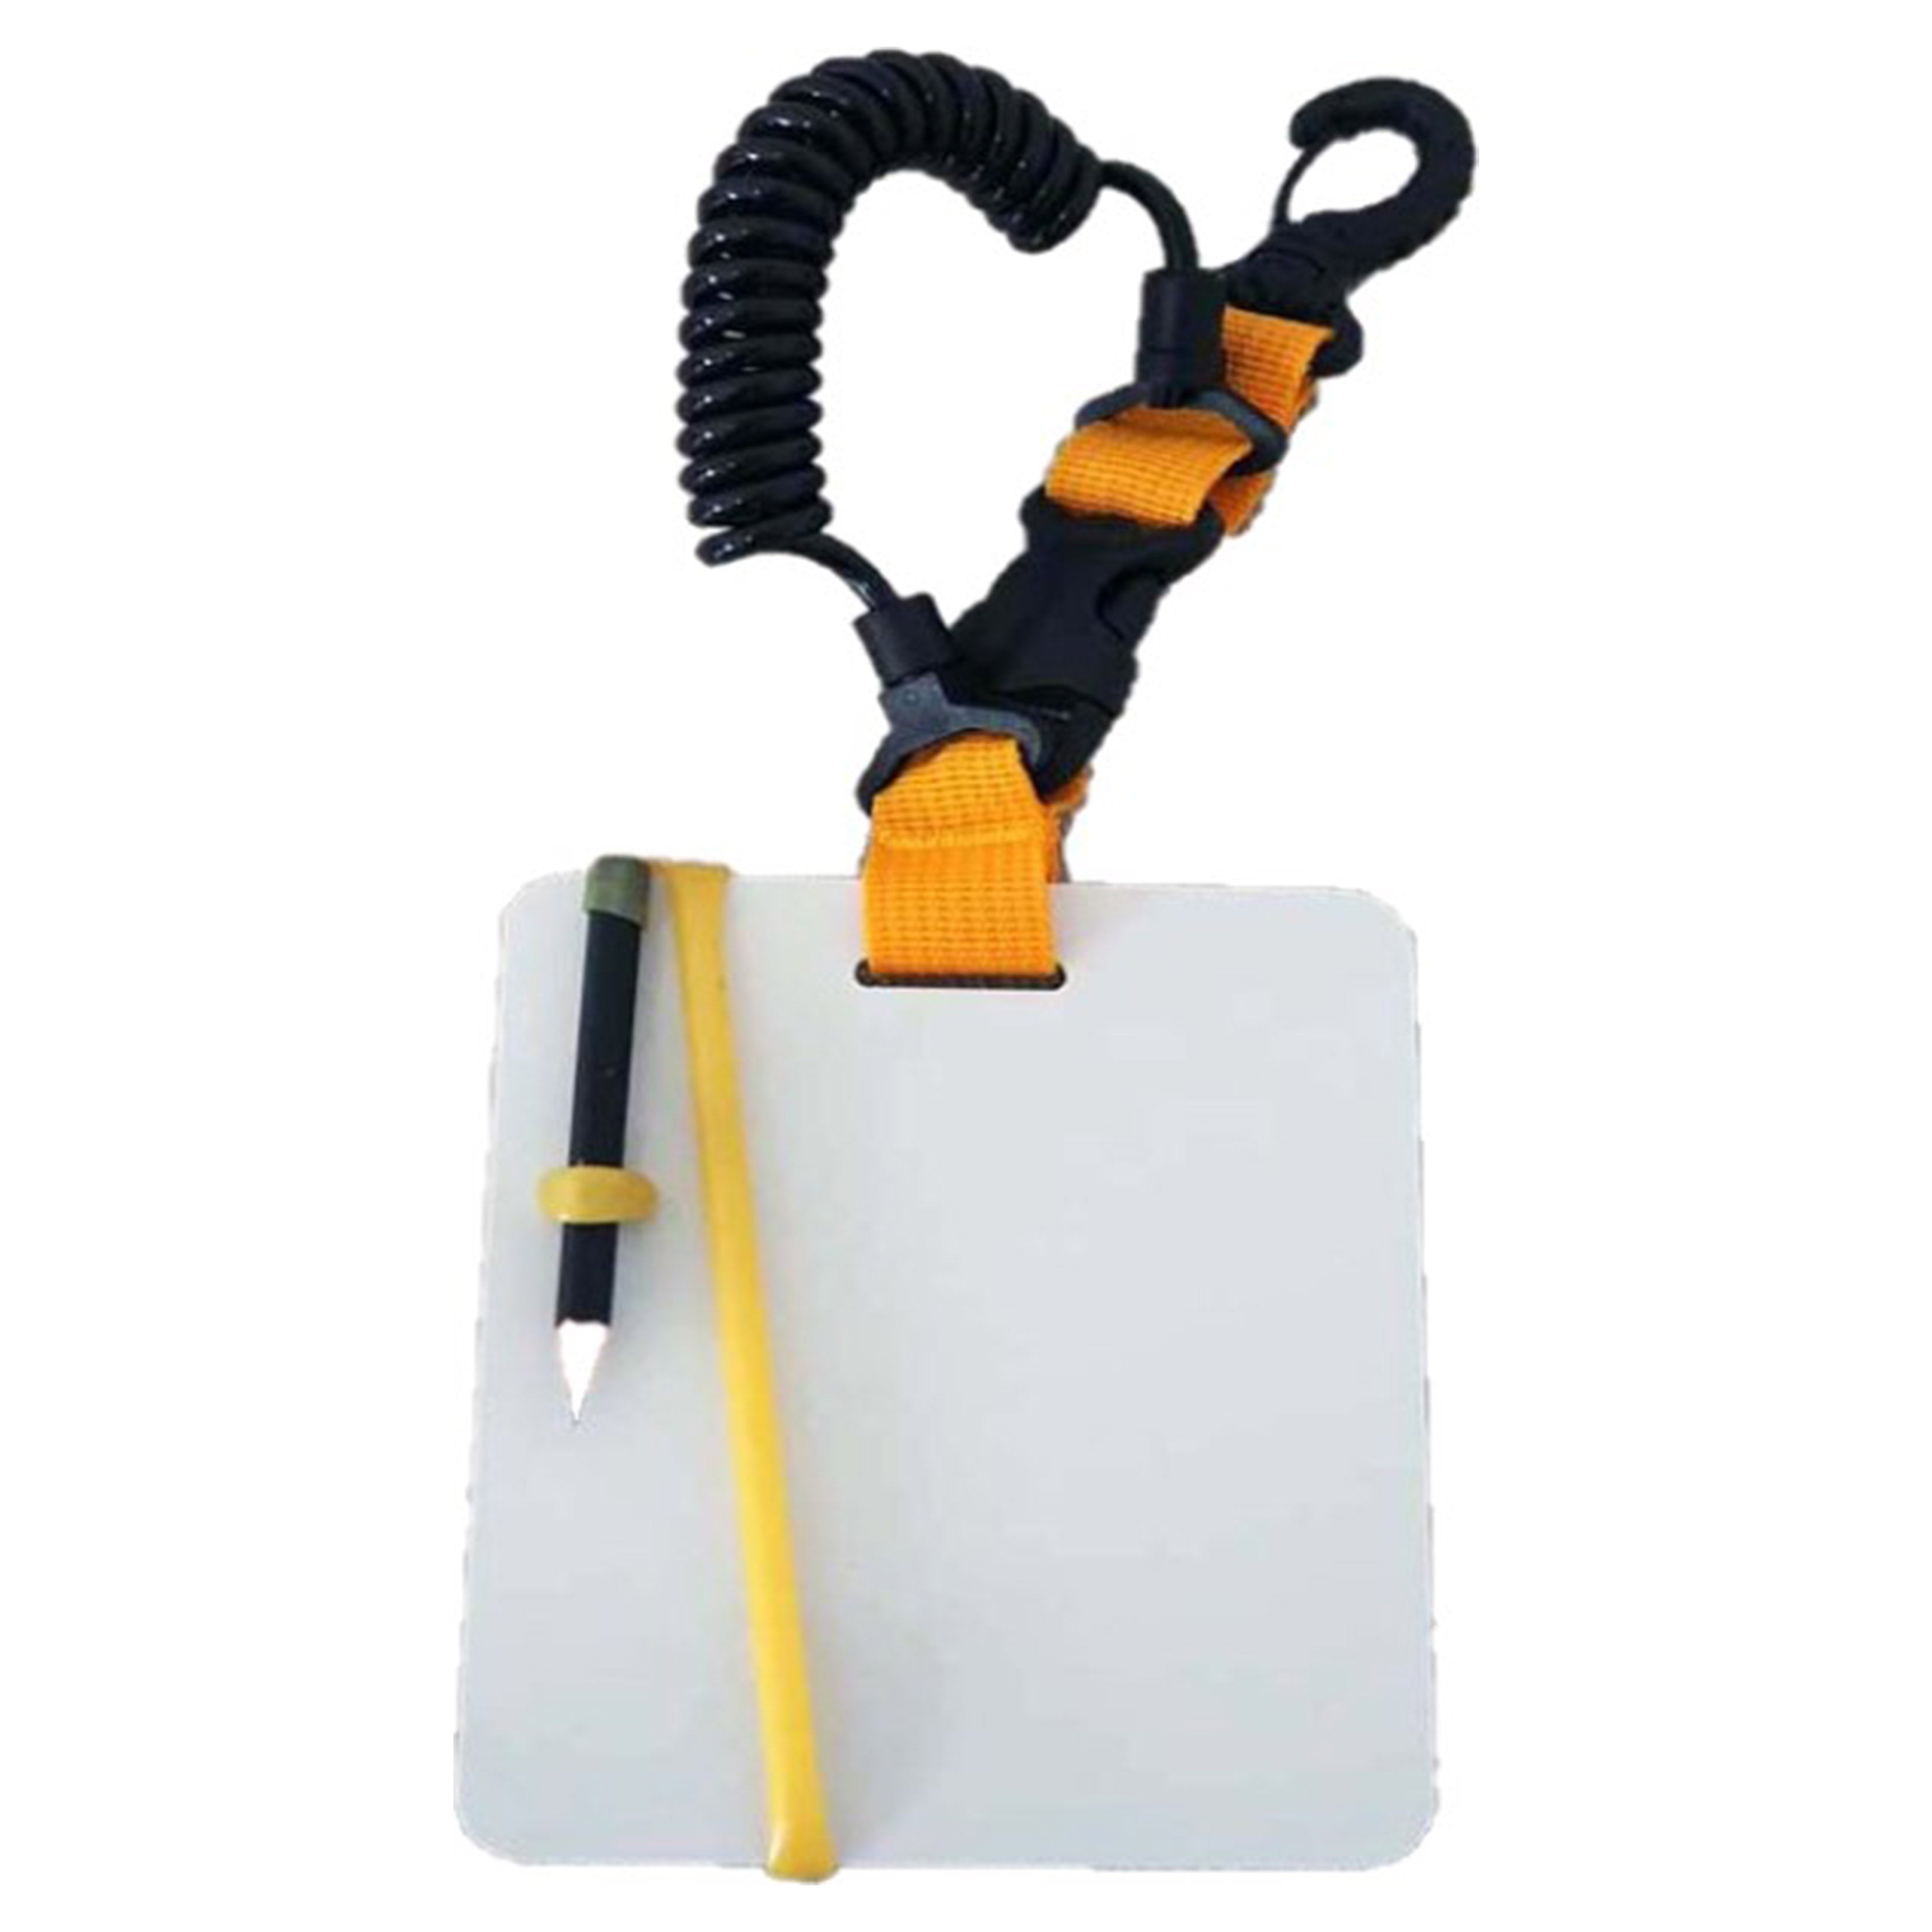 DIVING SLATE WITH SPRING LANYARD